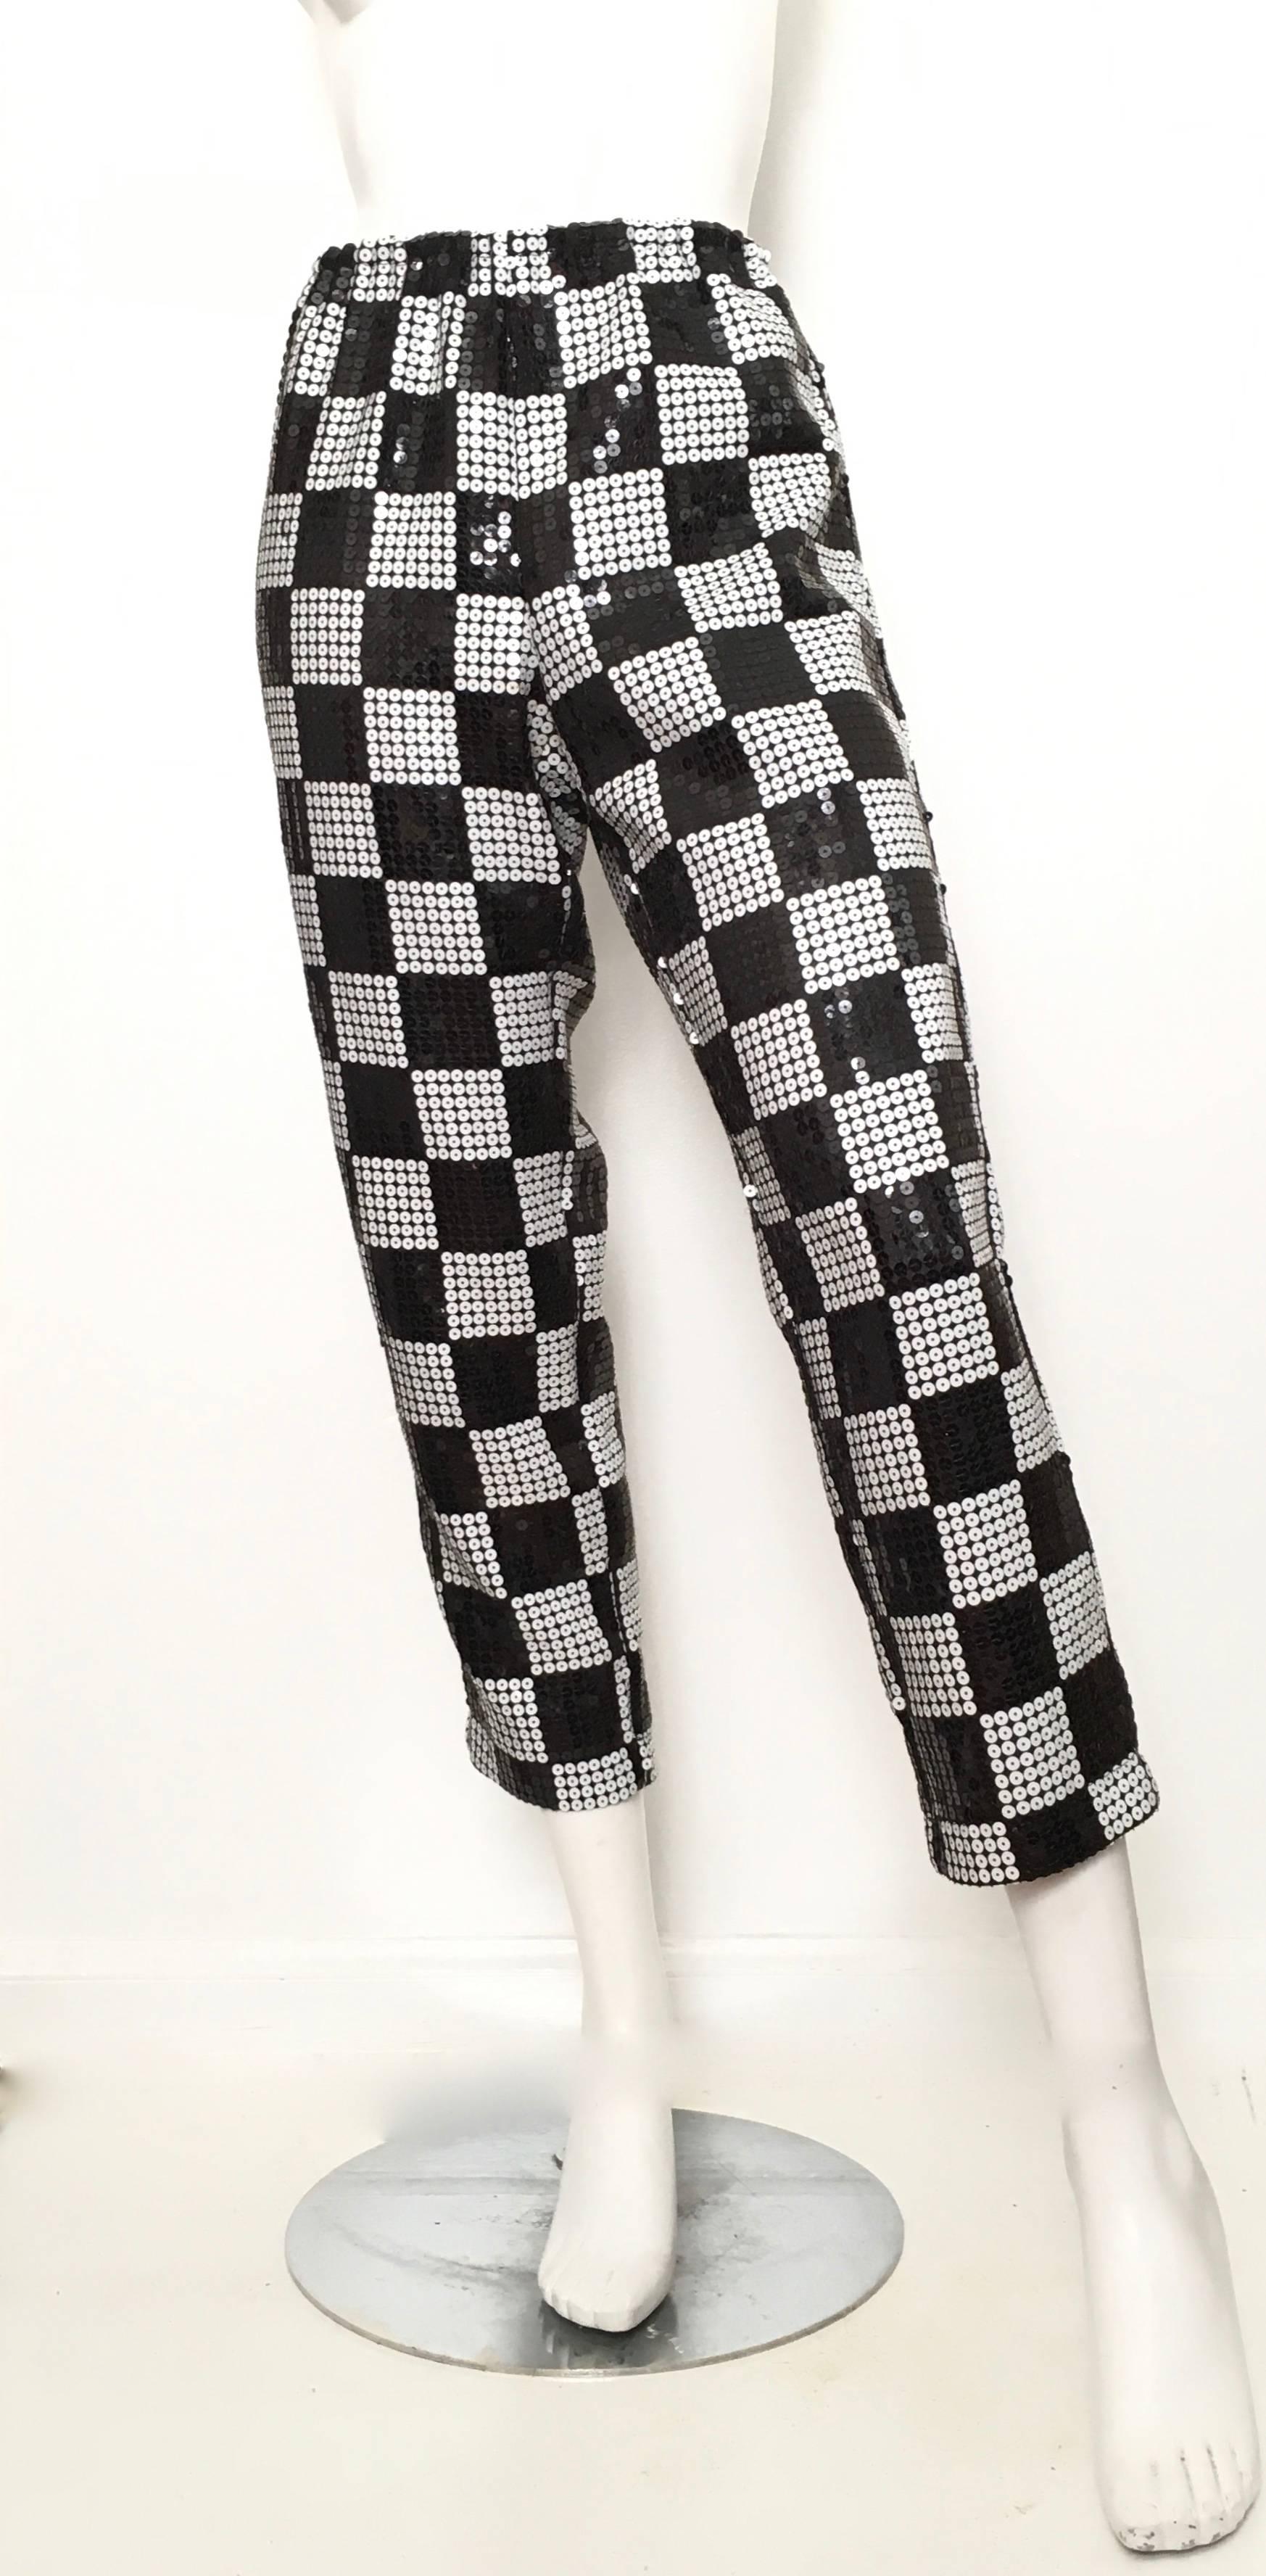 Comme des Garçons 1990, possibly 1999, black & white checker board pattern sequin pants are a size small and will fit an USA size 4 perfectly. Matilda the Mannequin is a size 4 and she is rocking them. Ladies please grab your trusted tape